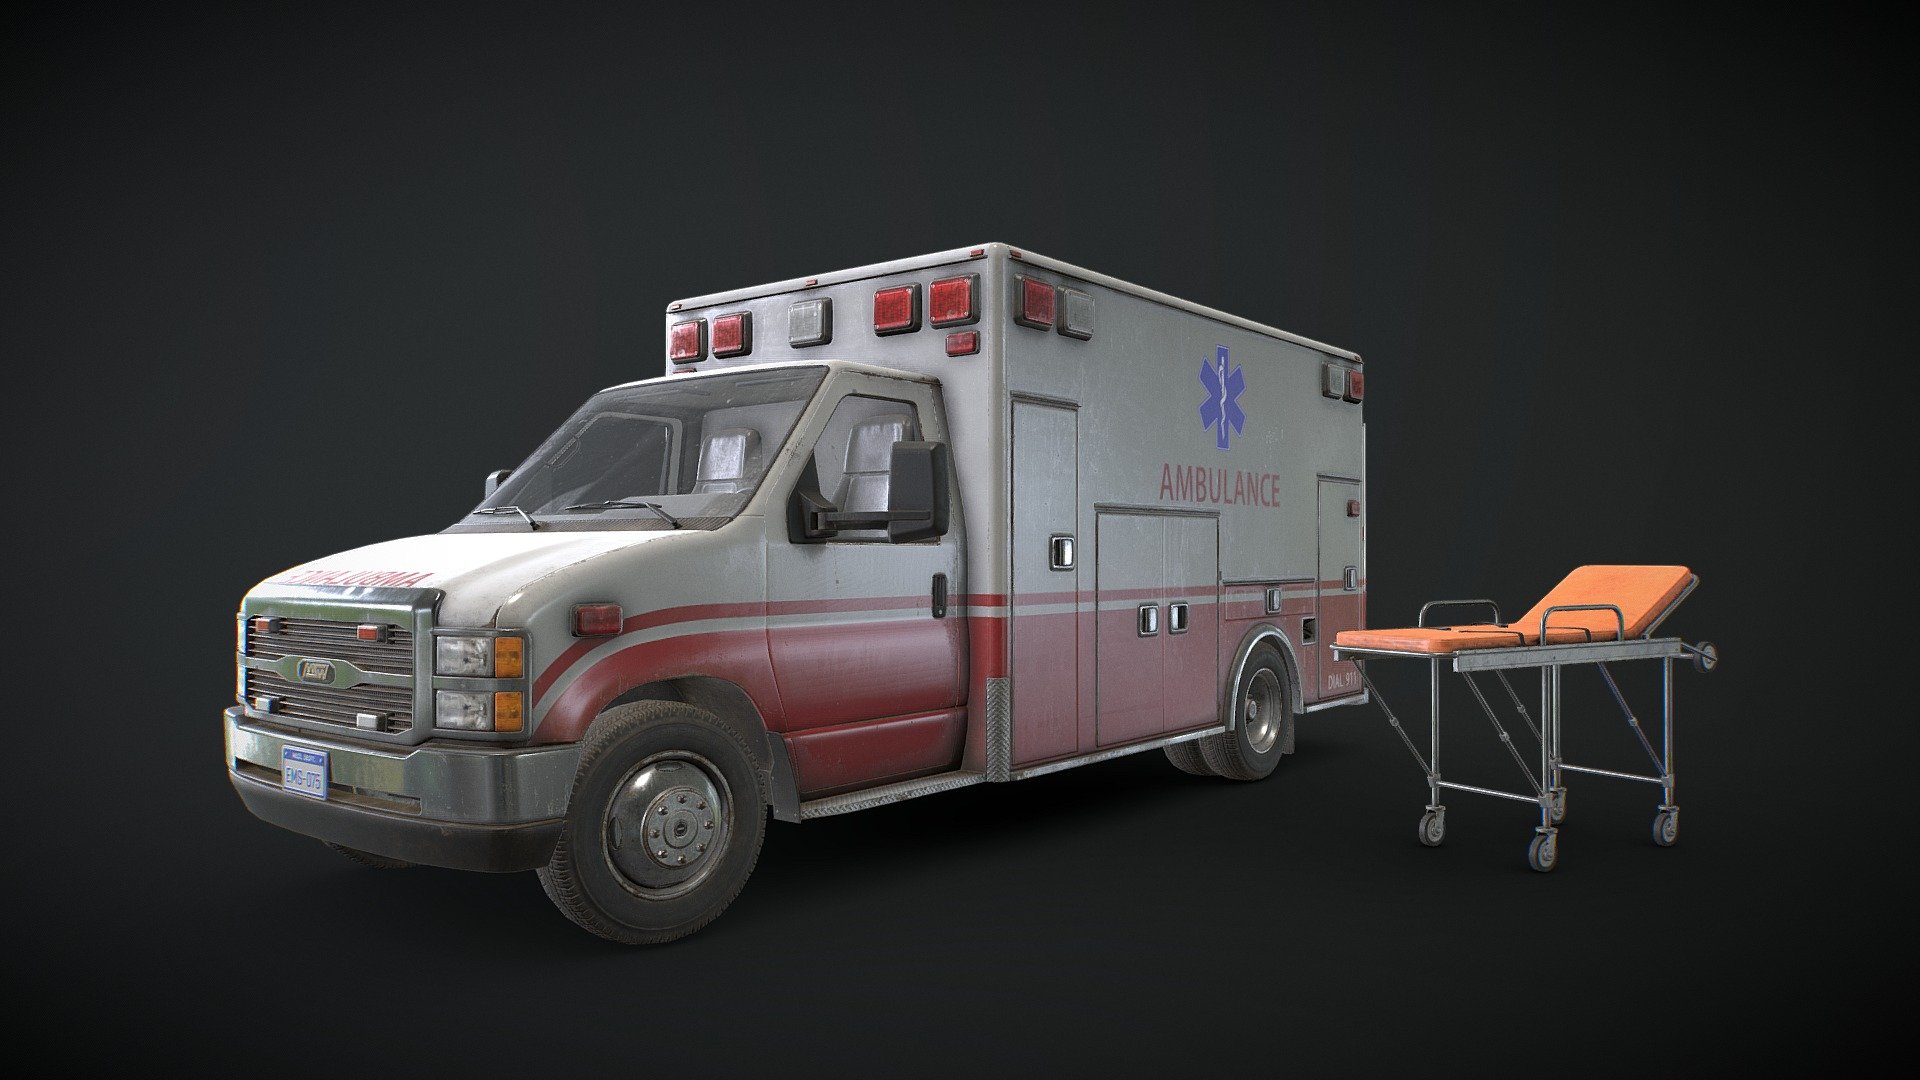 Game Ready Ambulance with finished interior and Stretcher included:




The unit of measurement used is centimeters

Front and back doors, wheels and steering wheel are separated and can be easily rigged/animated.

Interior and Box Interior are separate objects to detach if needed.

Stretcher as separate object and with 2 versions (open and folded)

PBR textures

All branding and labels are custom made

Second uv channel included

Packed ORM textures included

Average texel density: 1040 px/m

Polys:




Ambulance: 31.272 tris

Stretcher: 3.344 tris

TOTAL: 34.616 tris

Maps sizes: 




Body: 4096x4096

Details: 4096x4096

Interior: 4096x4096

Box Interior: 4096x4096

Wheels: 2048x2048

Windows: 2048x2048

Stretcher: 2048x2048

Provided Maps:




Albedo 

Normal

Roughness

Metalness

AO

Opacity included in Albedo (windows)

Emissive

Formats Incuded - MAX / BLEND / OBJ / FBX 

This model can be used for any game, film, personal project, etc. You may not resell or redistribute - Ambulance Type 1 - Low Poly - Buy Royalty Free 3D model by MSWoodvine 3d model